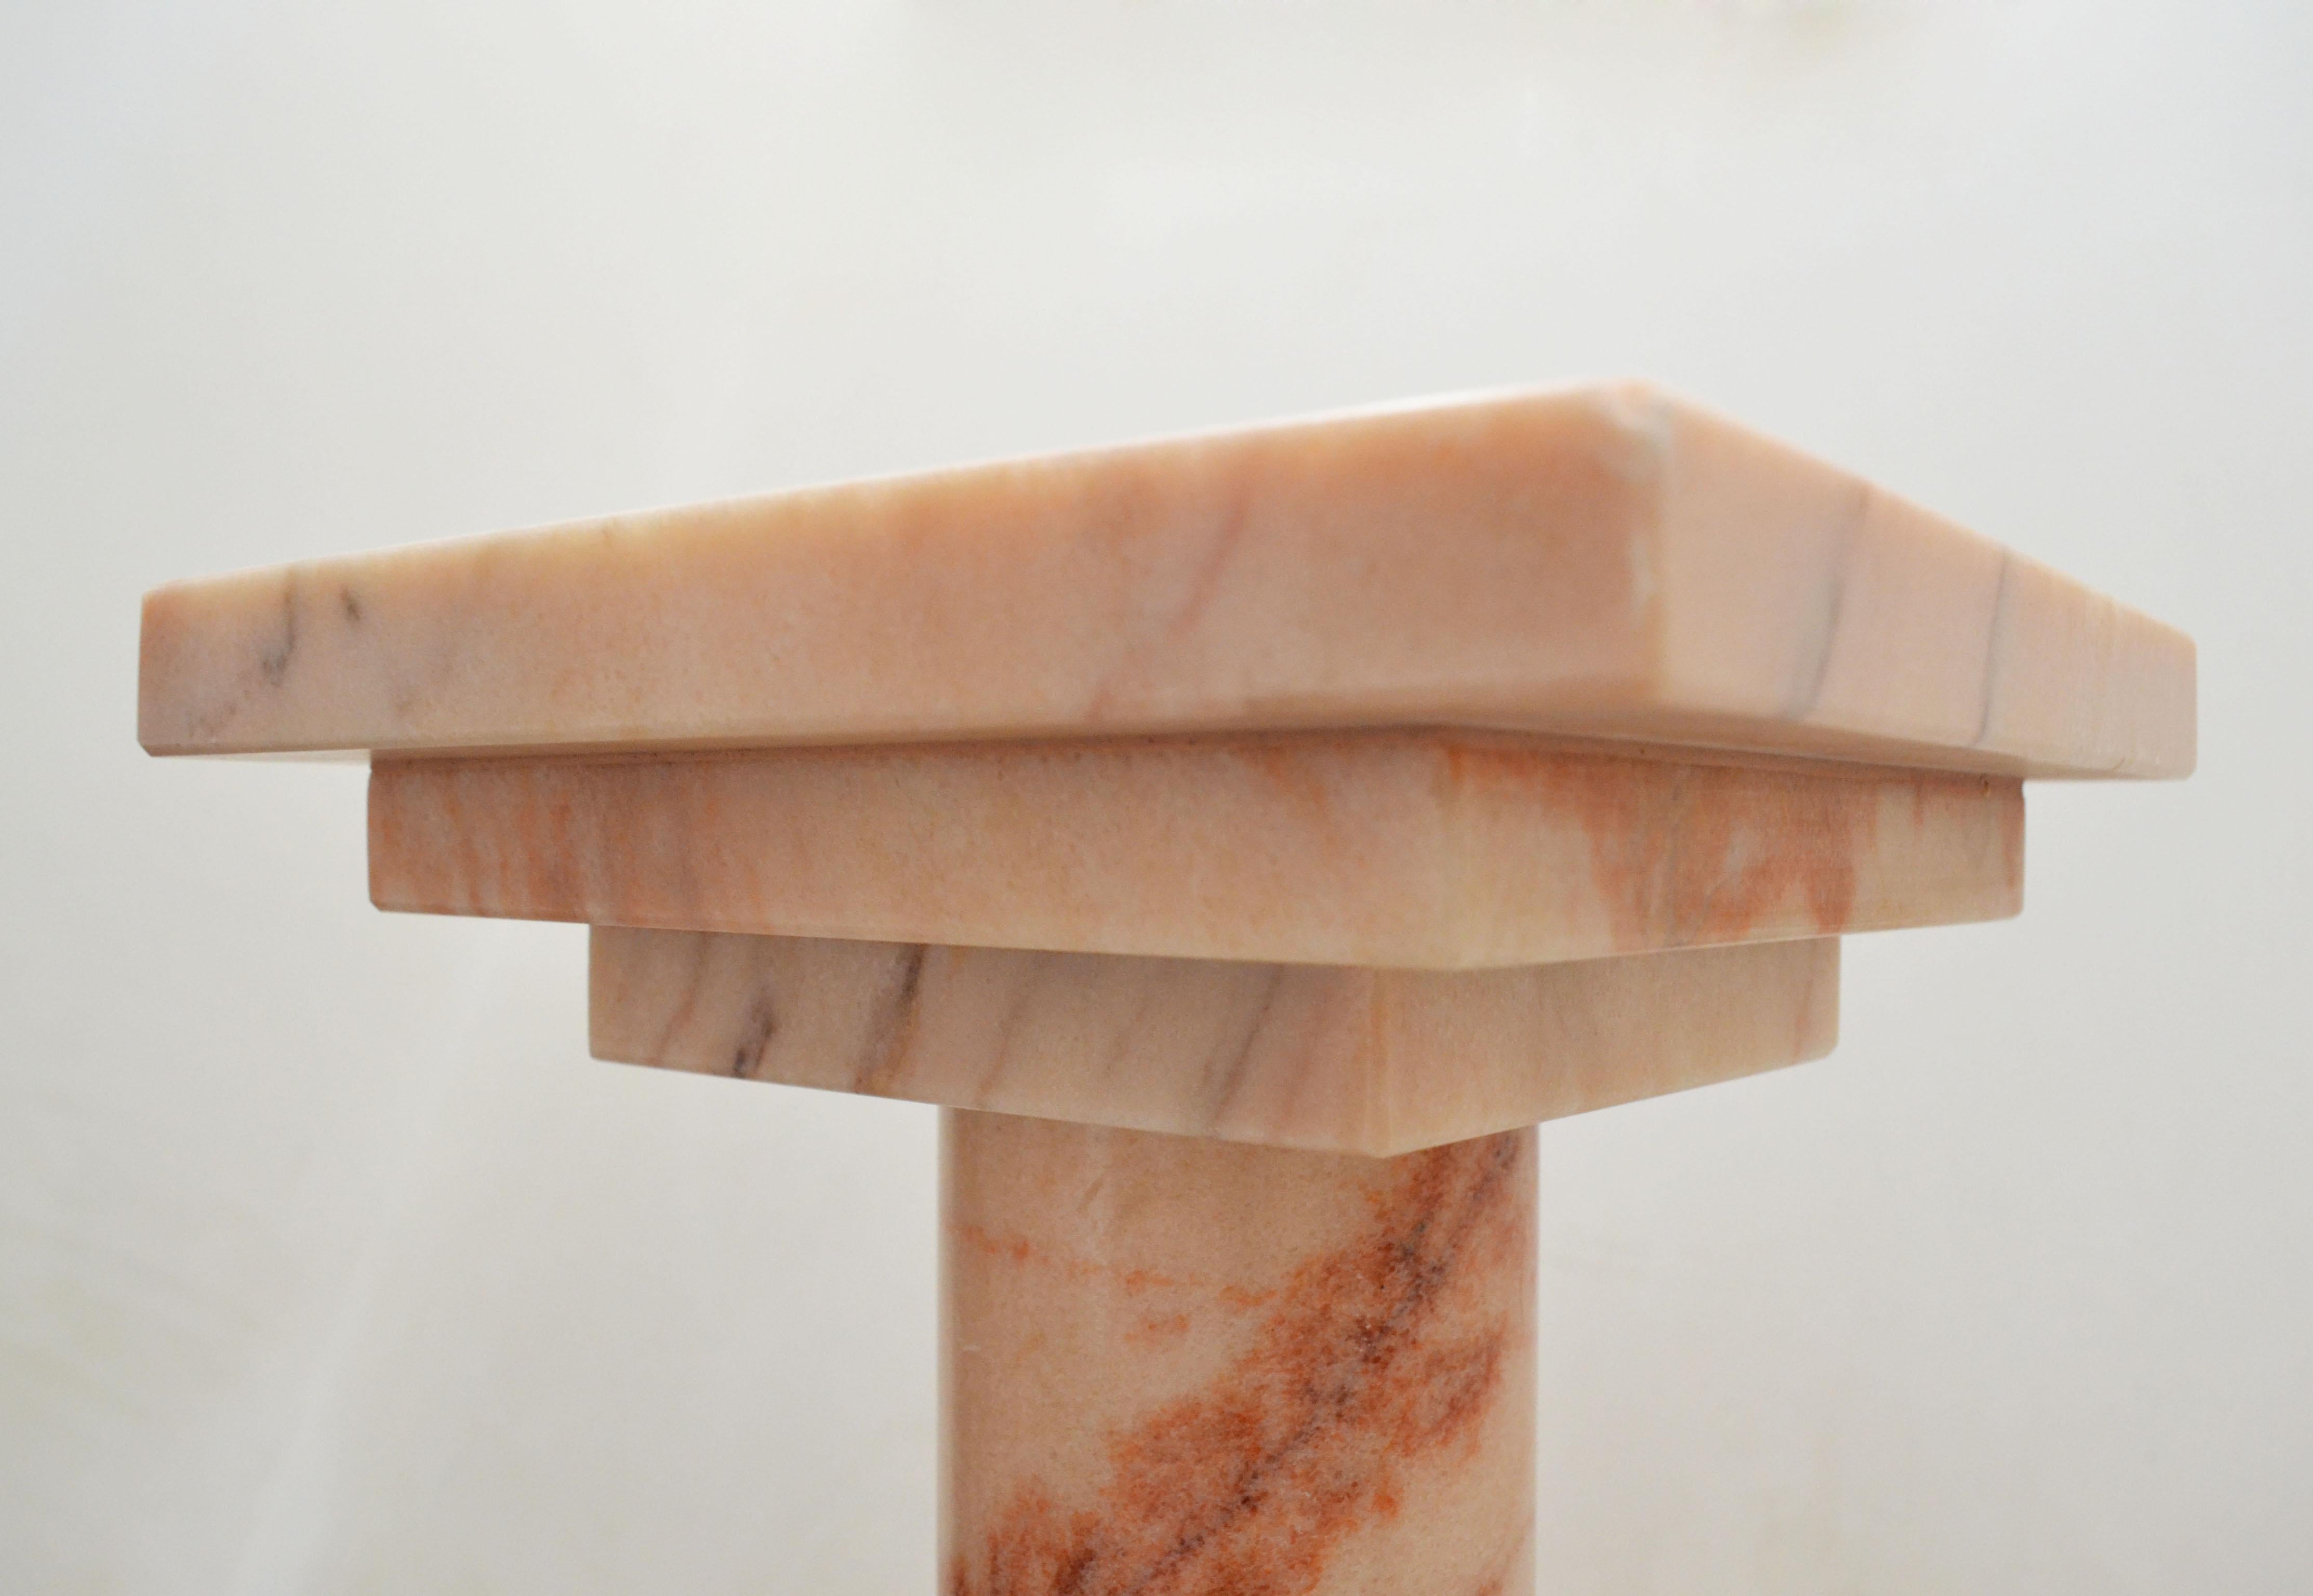 A marvelous podium - prefect to display a cherished item - or beautiful in its own right.

Crafted from a solid piece of Portuguese rose marble, this piece is ideal to add that something extra to your home.

Available in different colors to suit